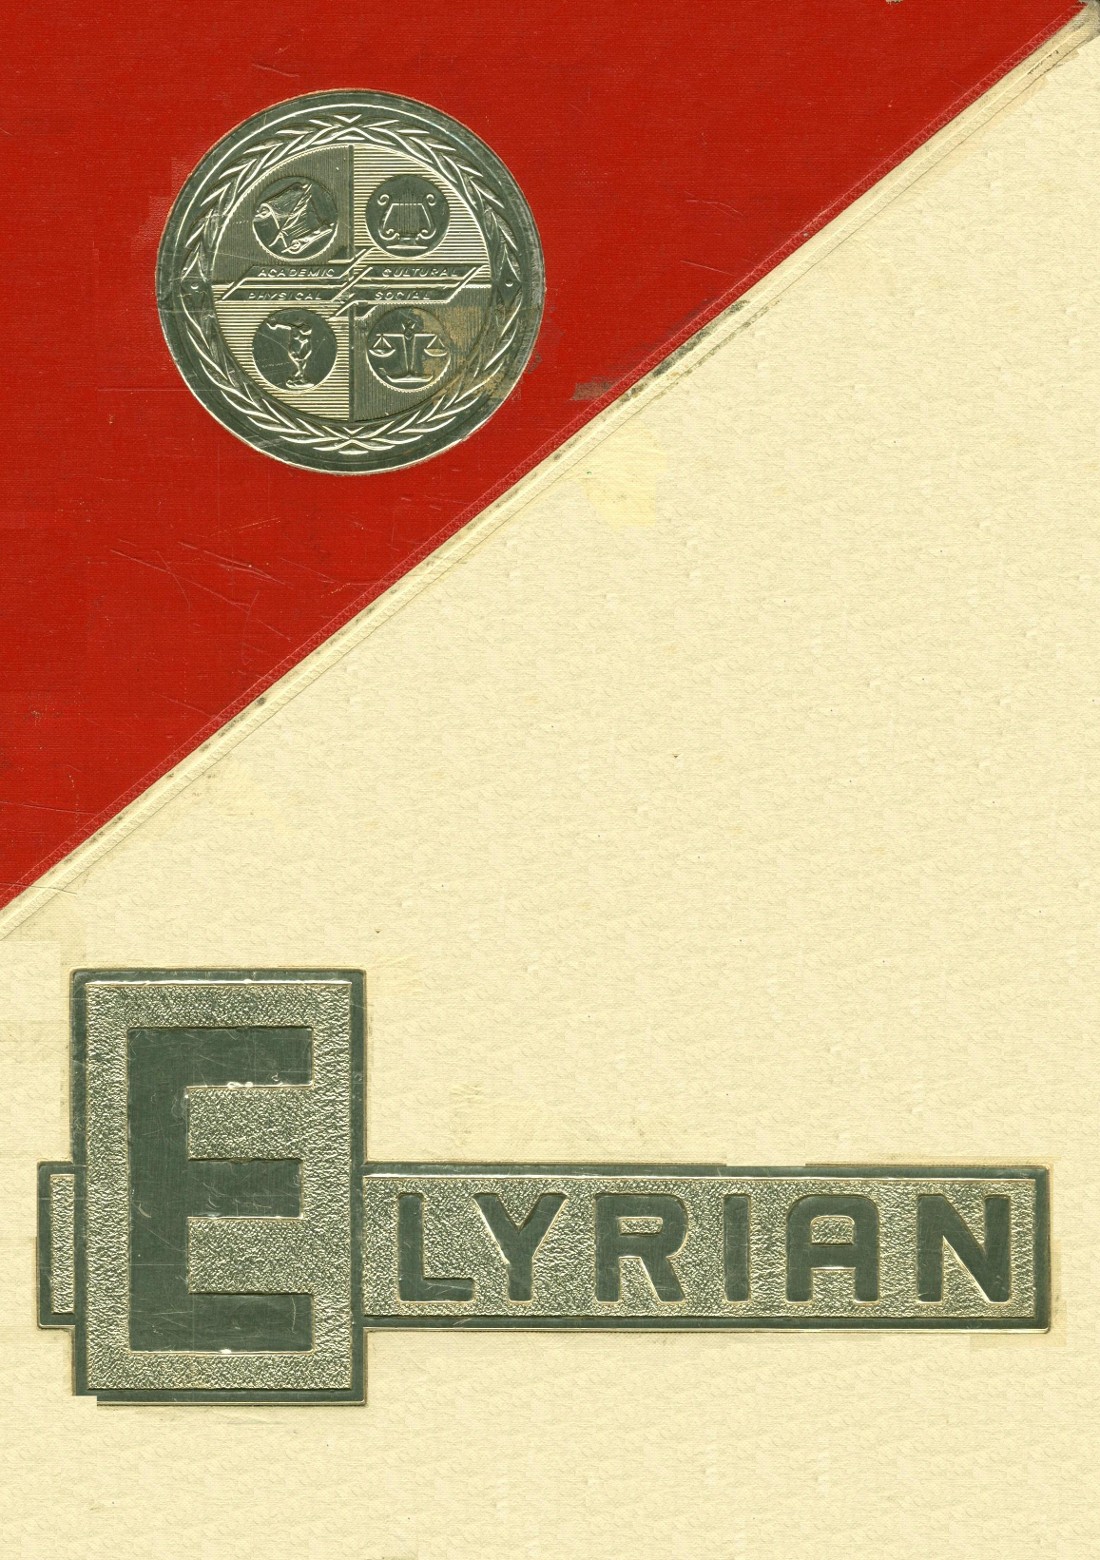 1967 yearbook from Elyria High School from Elyria, Ohio